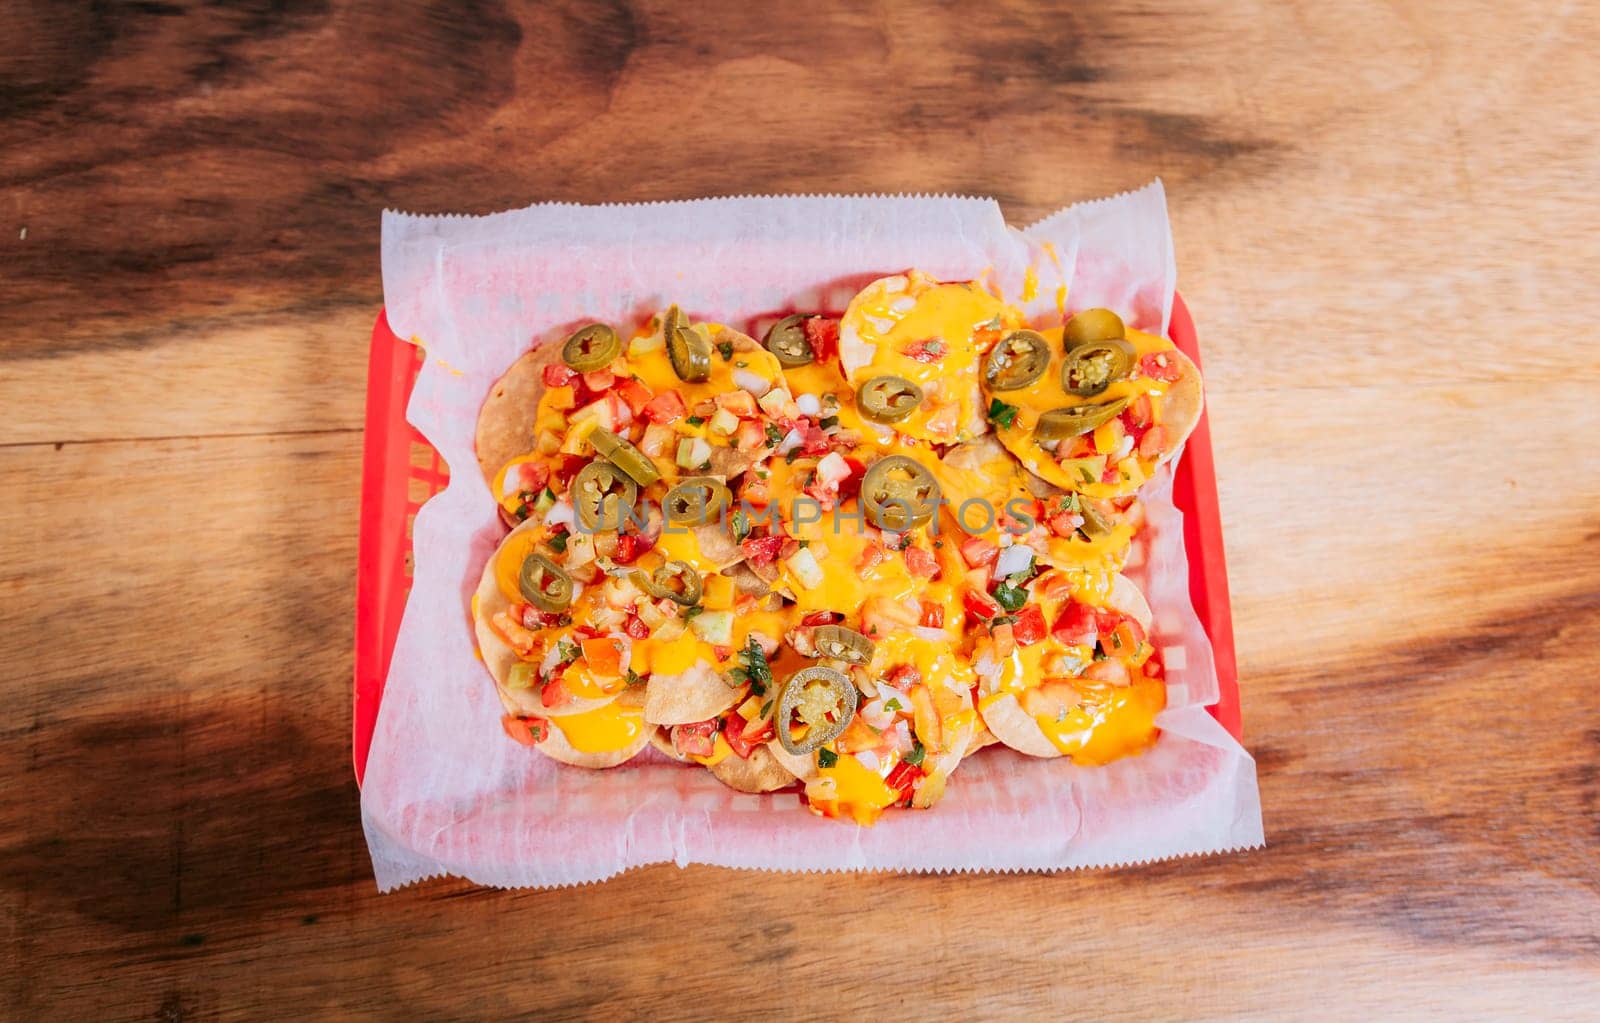 Top view of homemade nachos with jalapeno and melted cheese on wooden table. Mexican nachos with melted cheese and jalapeno